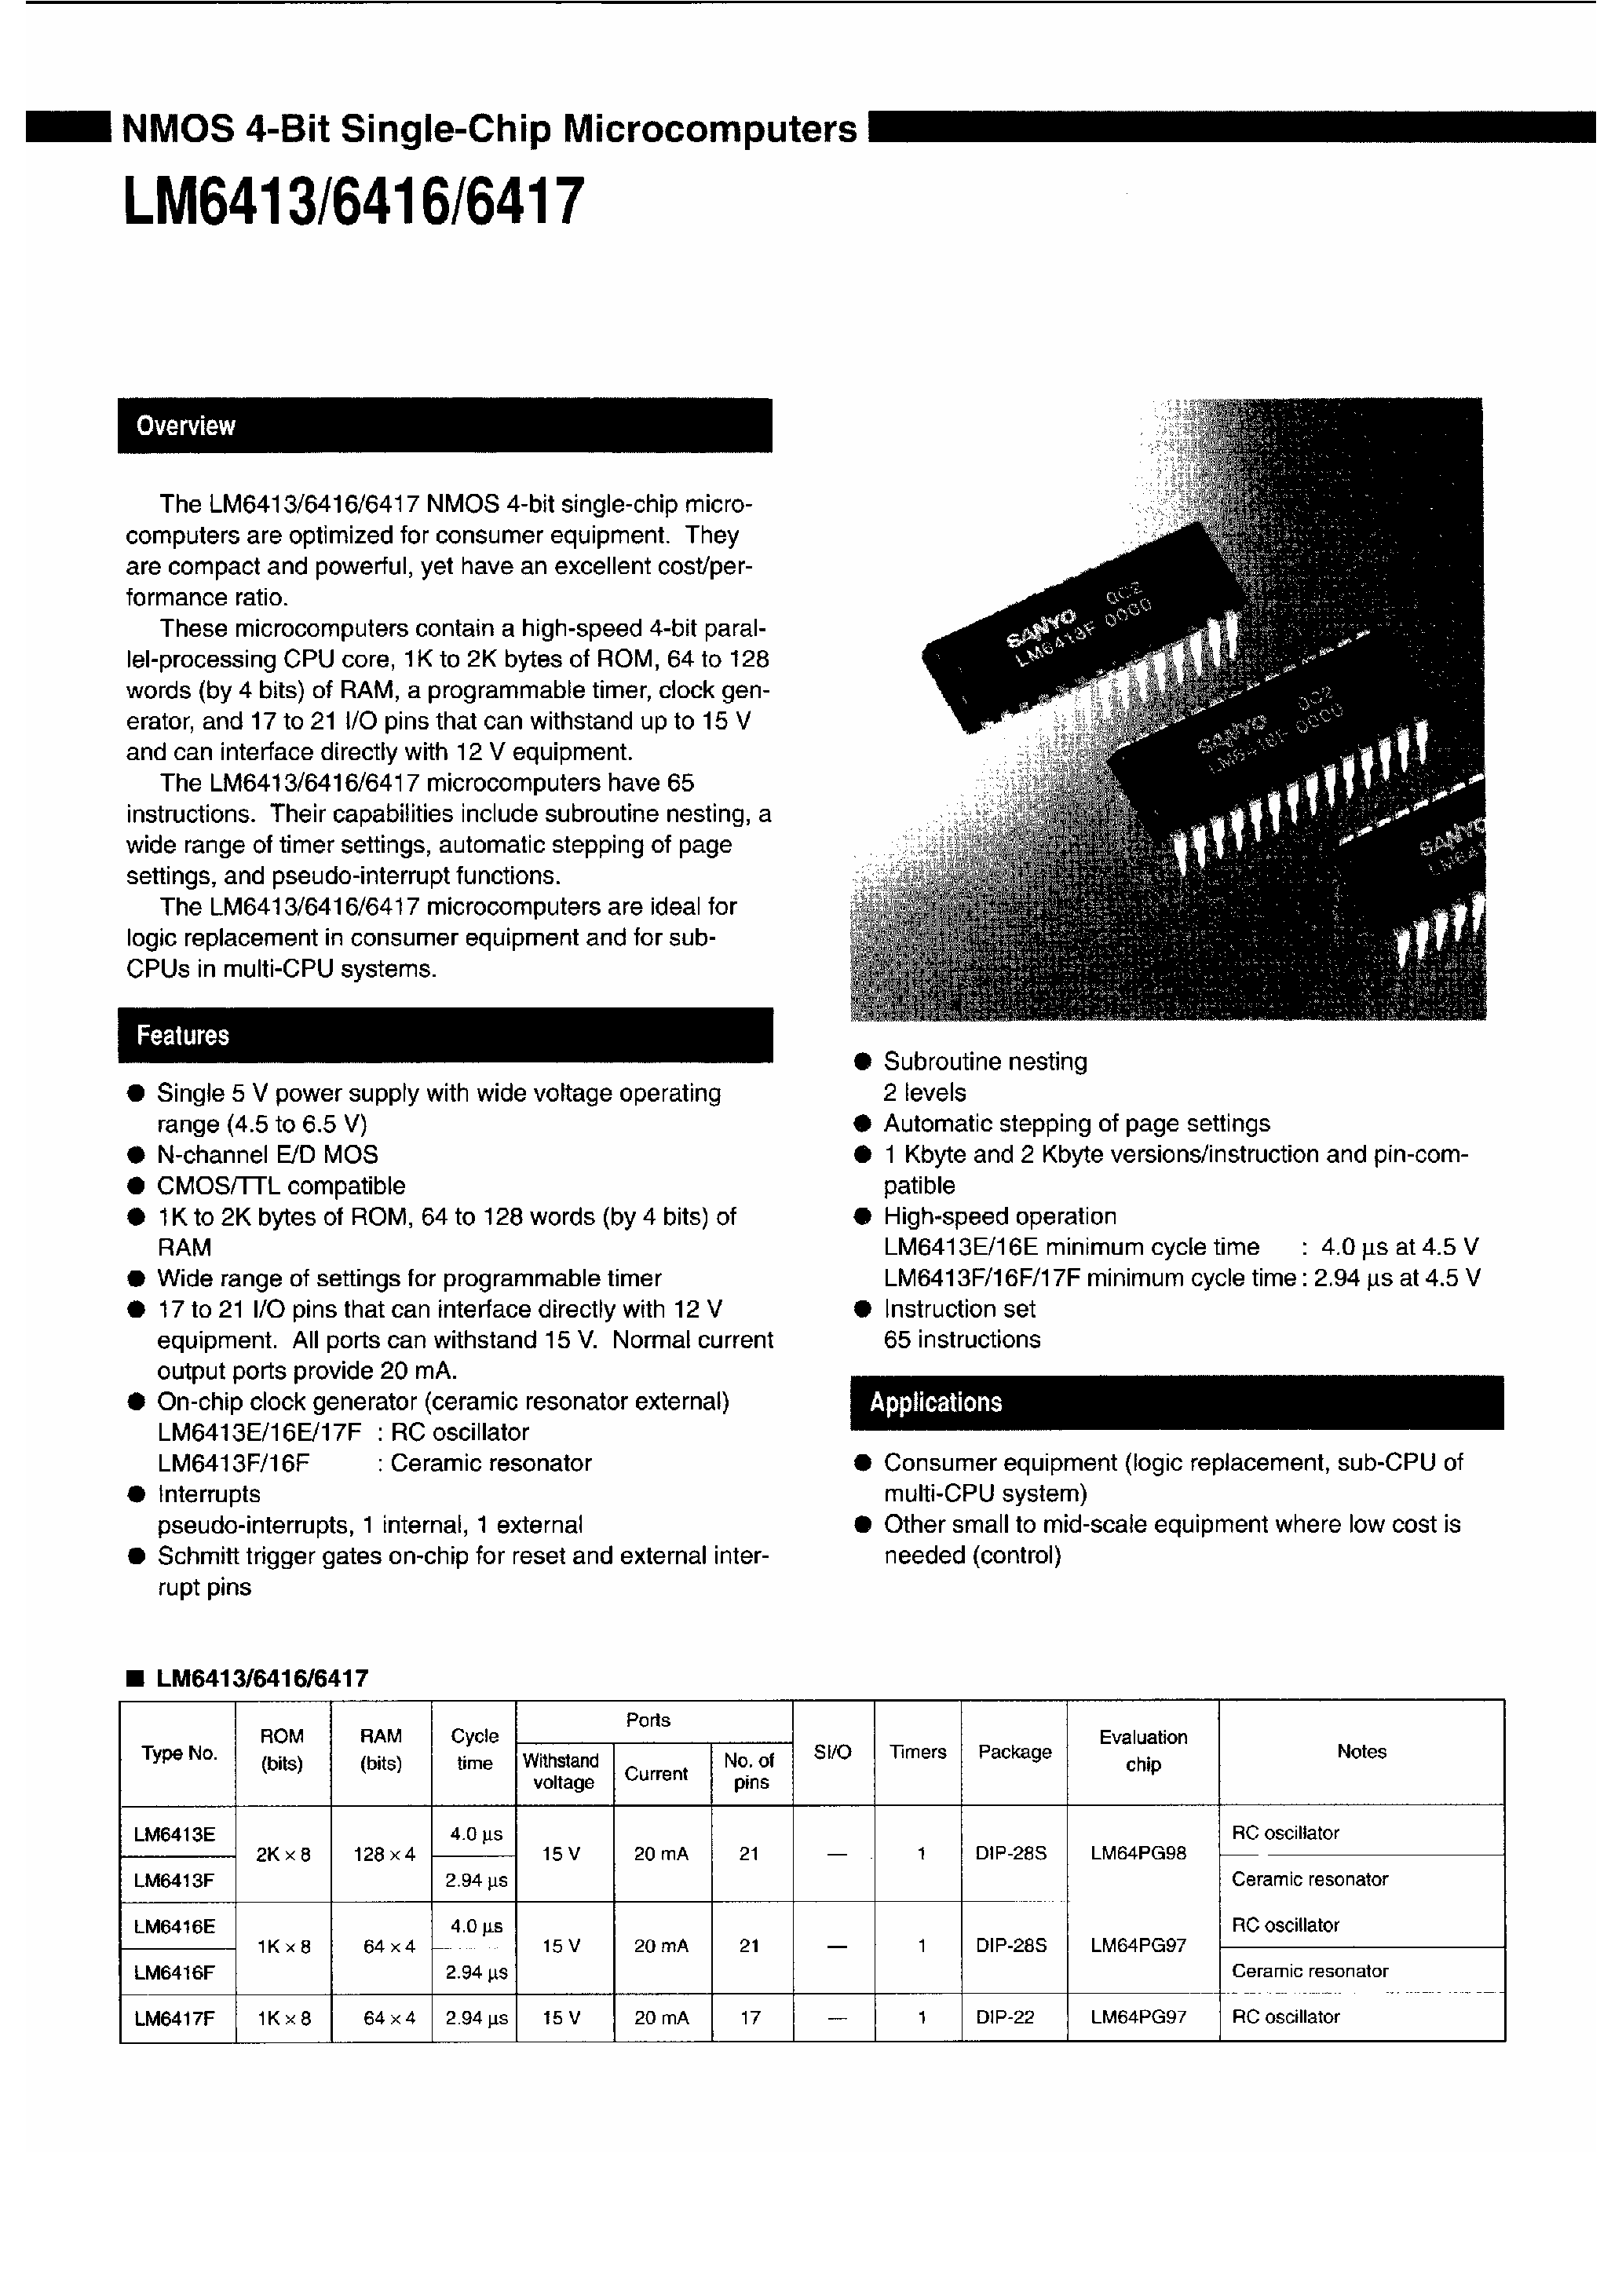 Datasheet LM6413 - (LM6413 / LM6416 / LM6417) NMOS 4-Bit Single-Chip Microcomputers page 1